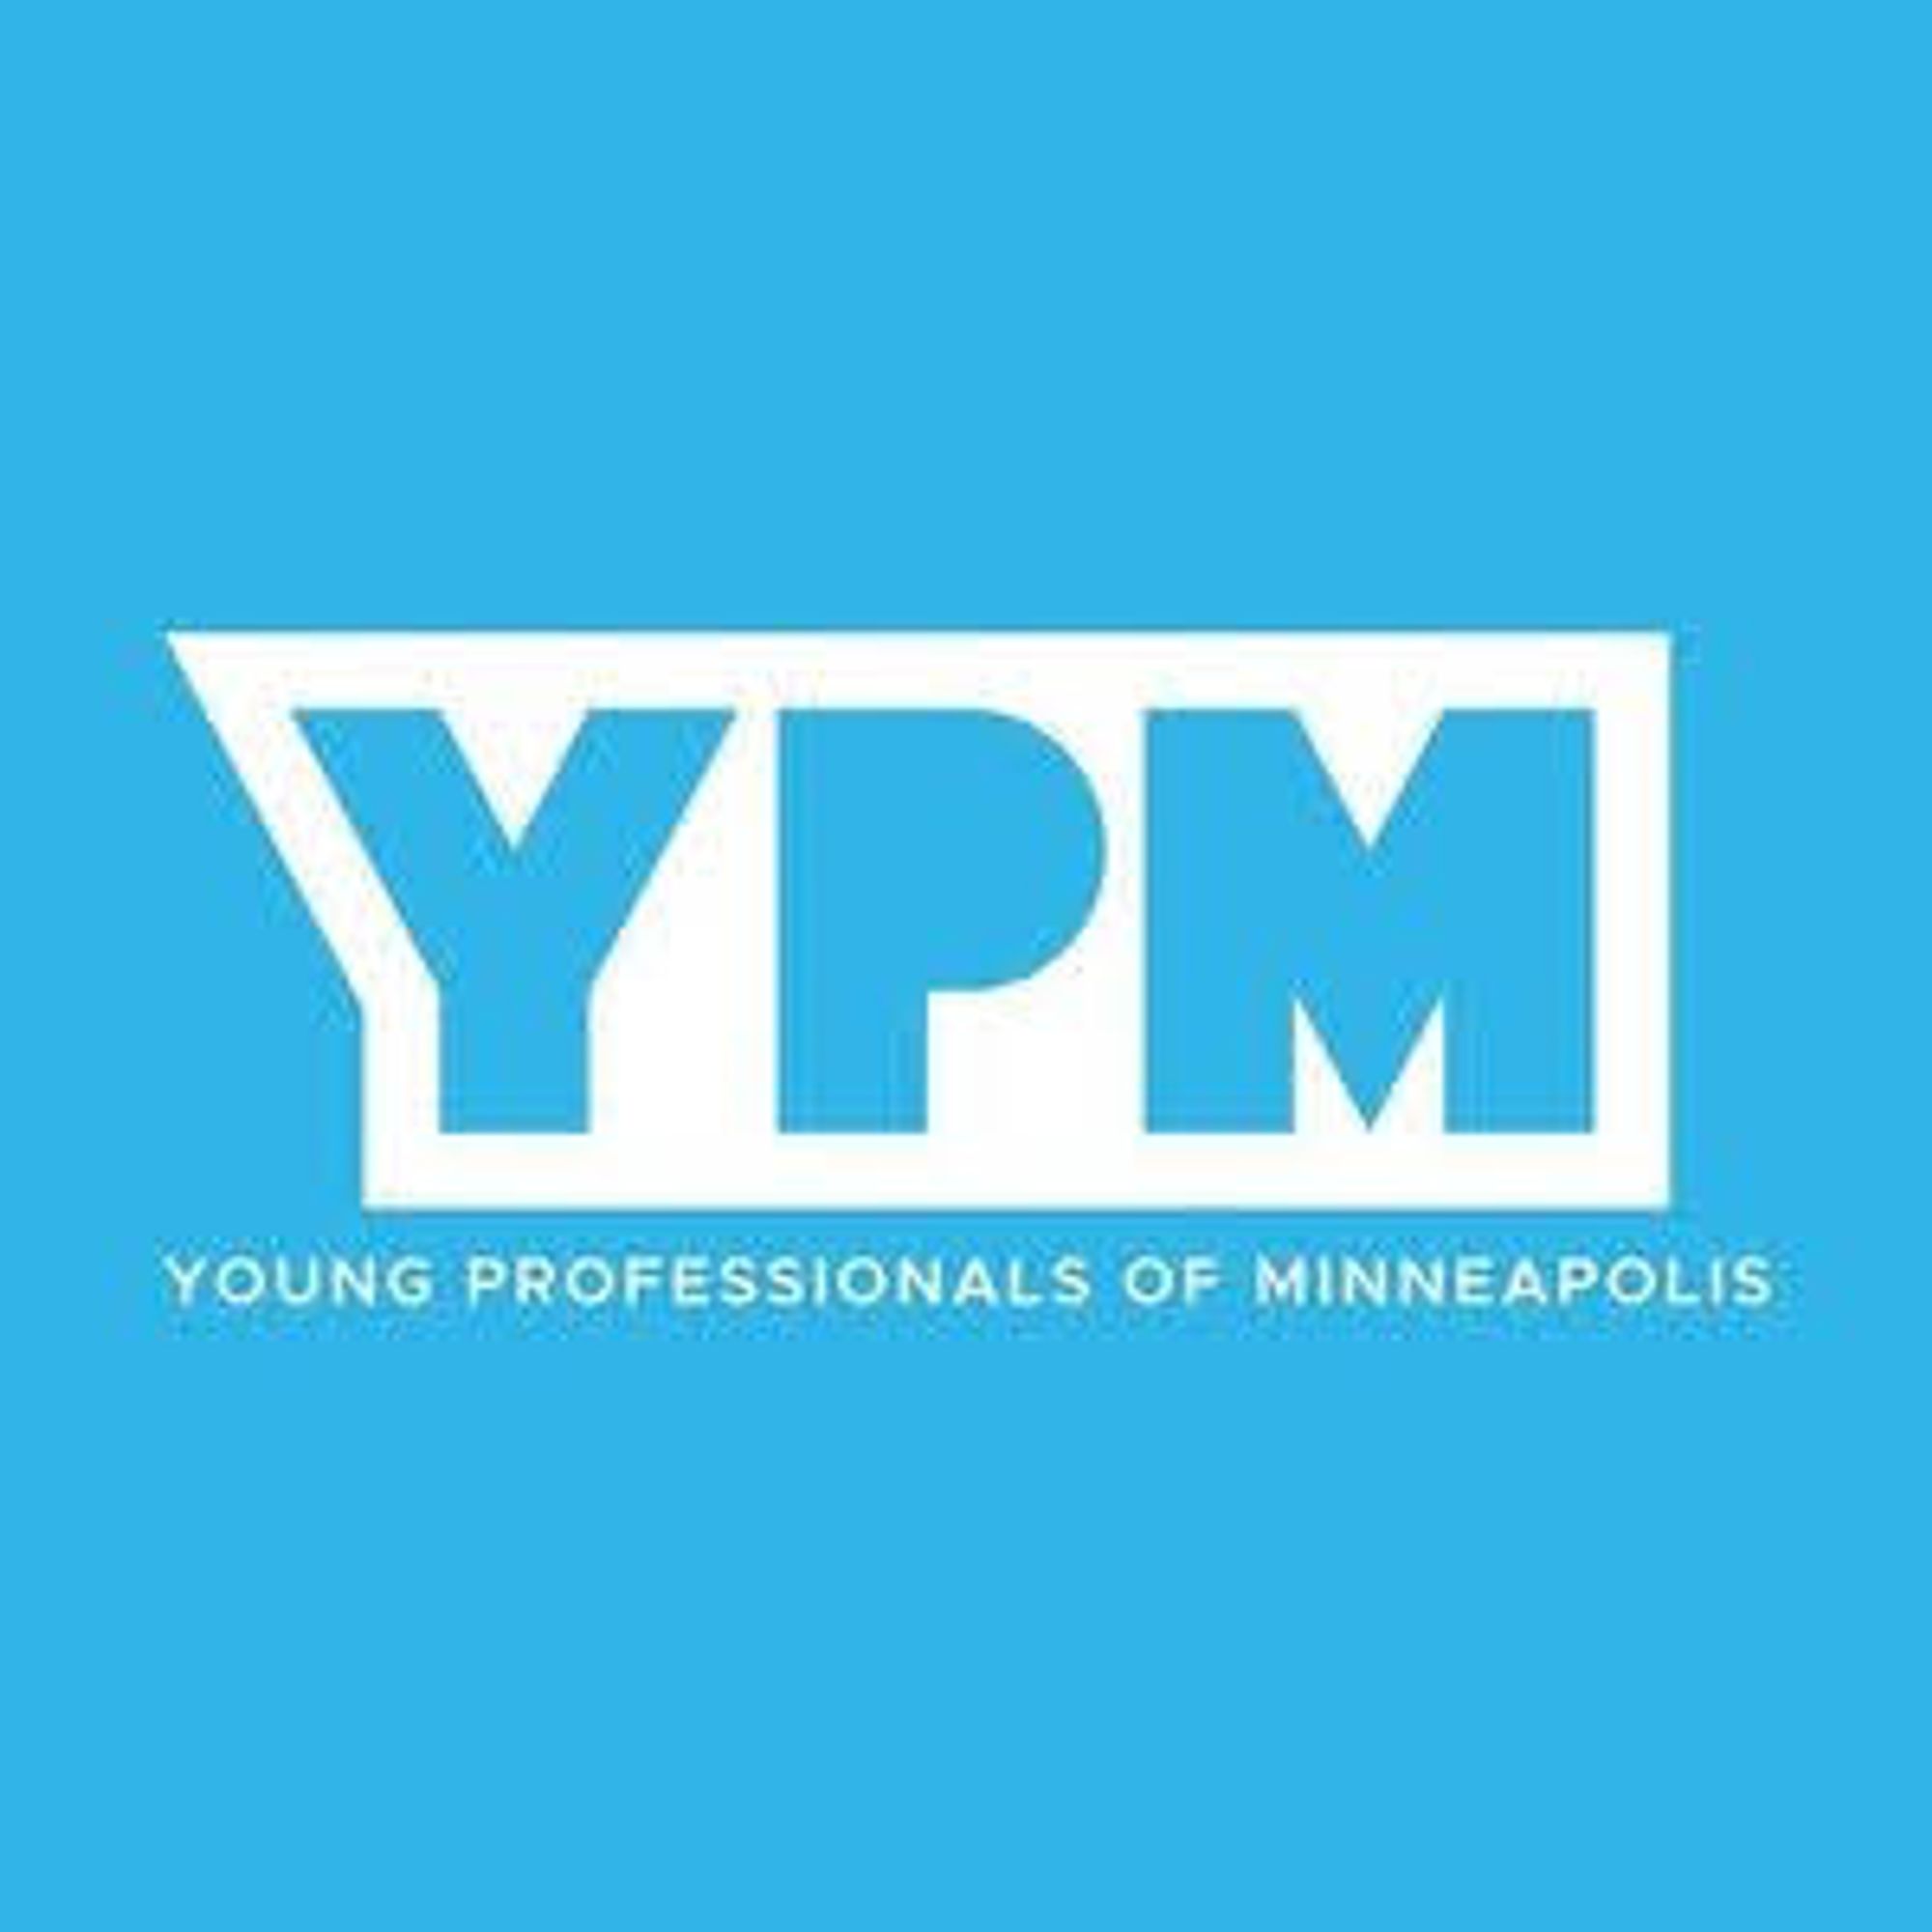 Young Professionals of Minneapolis